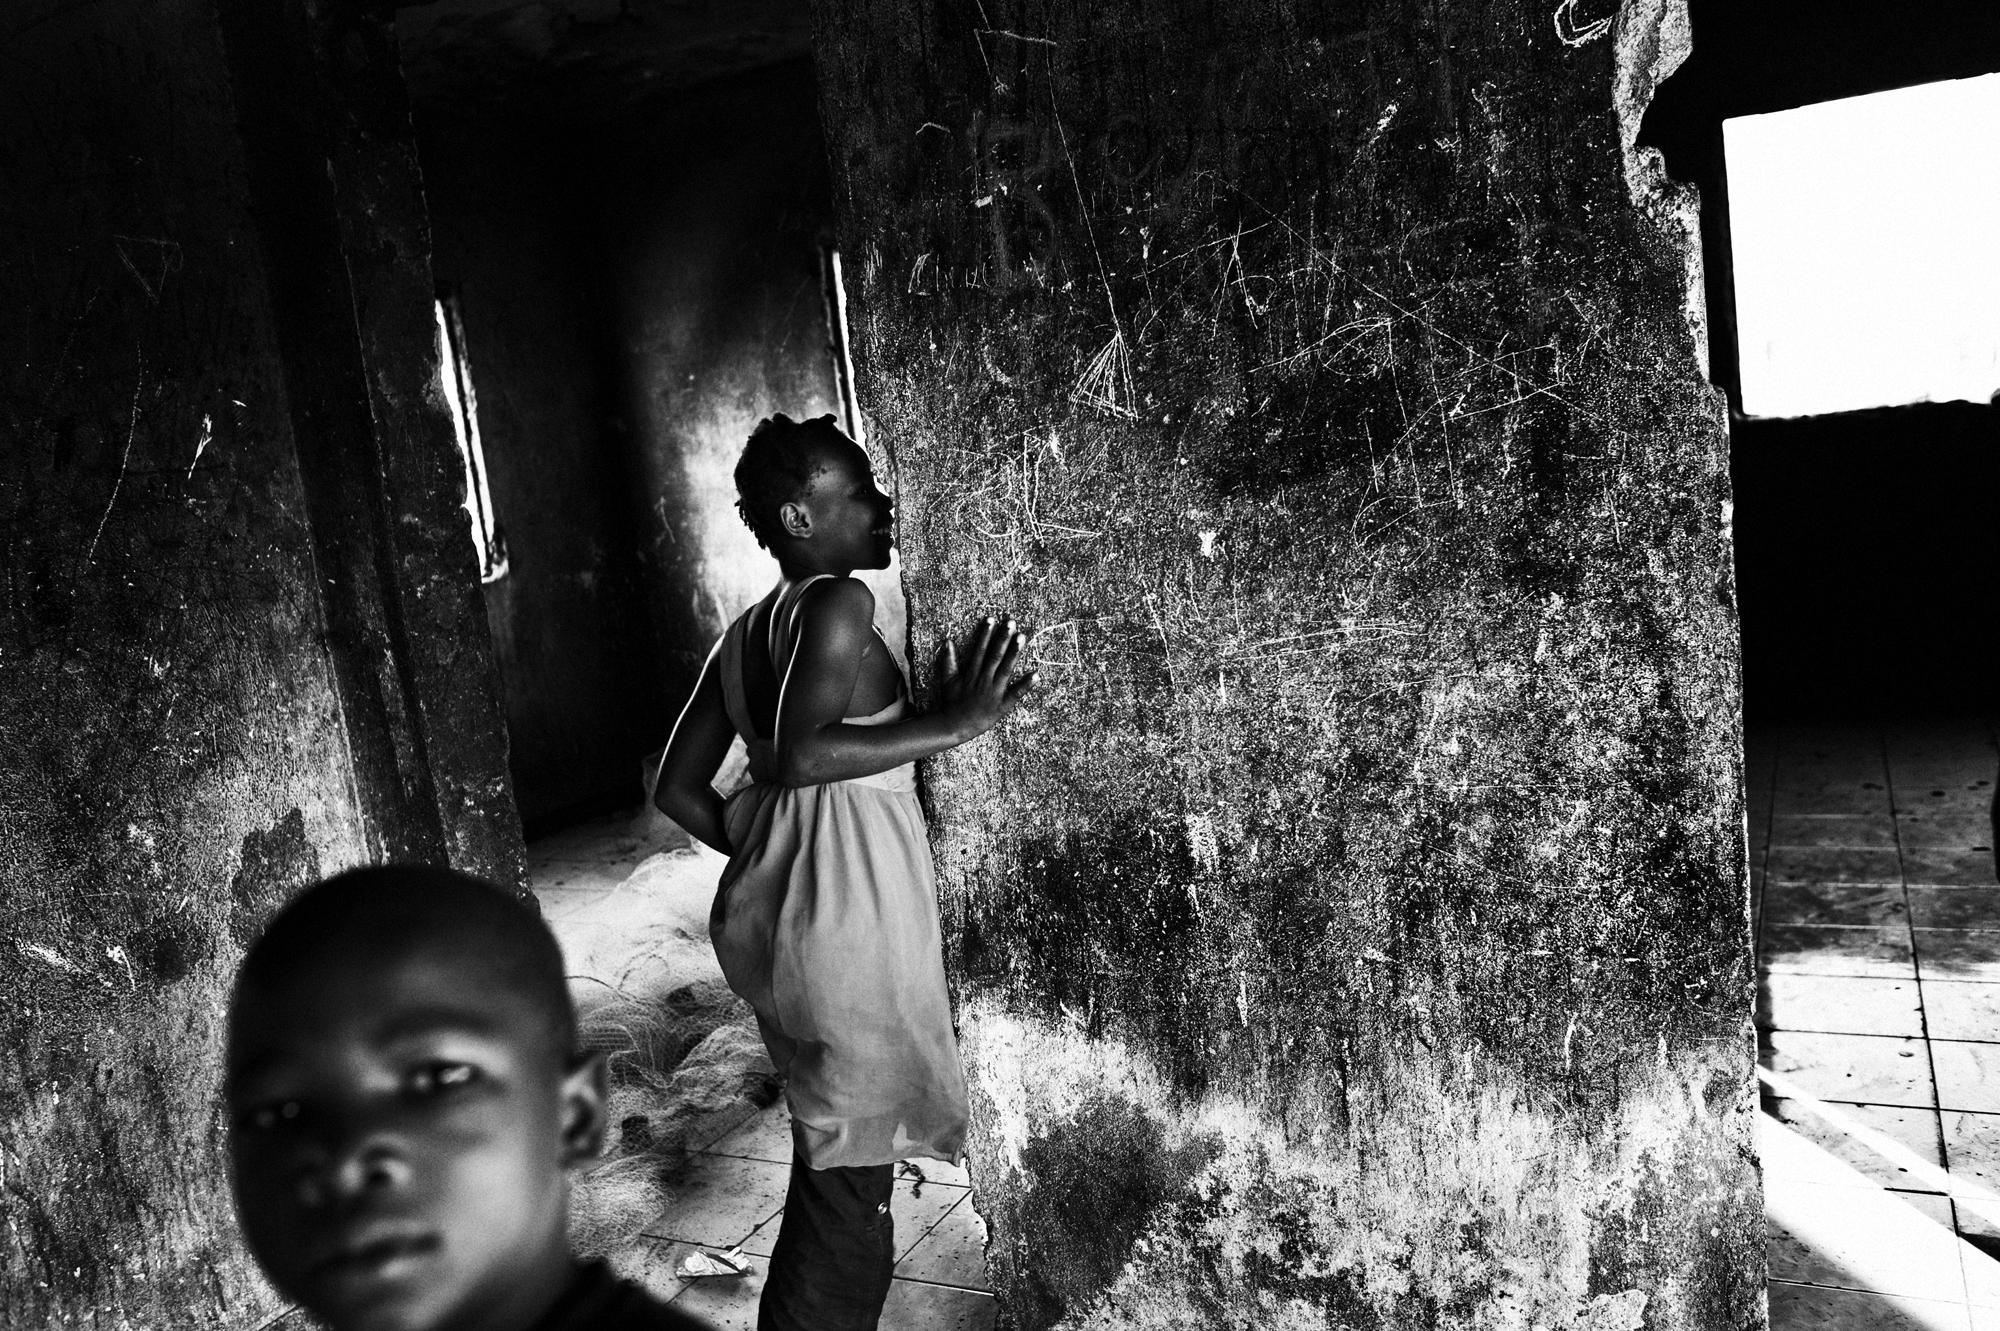 Private hell - Port au Prince.June 2010.Children playing in a destryed...